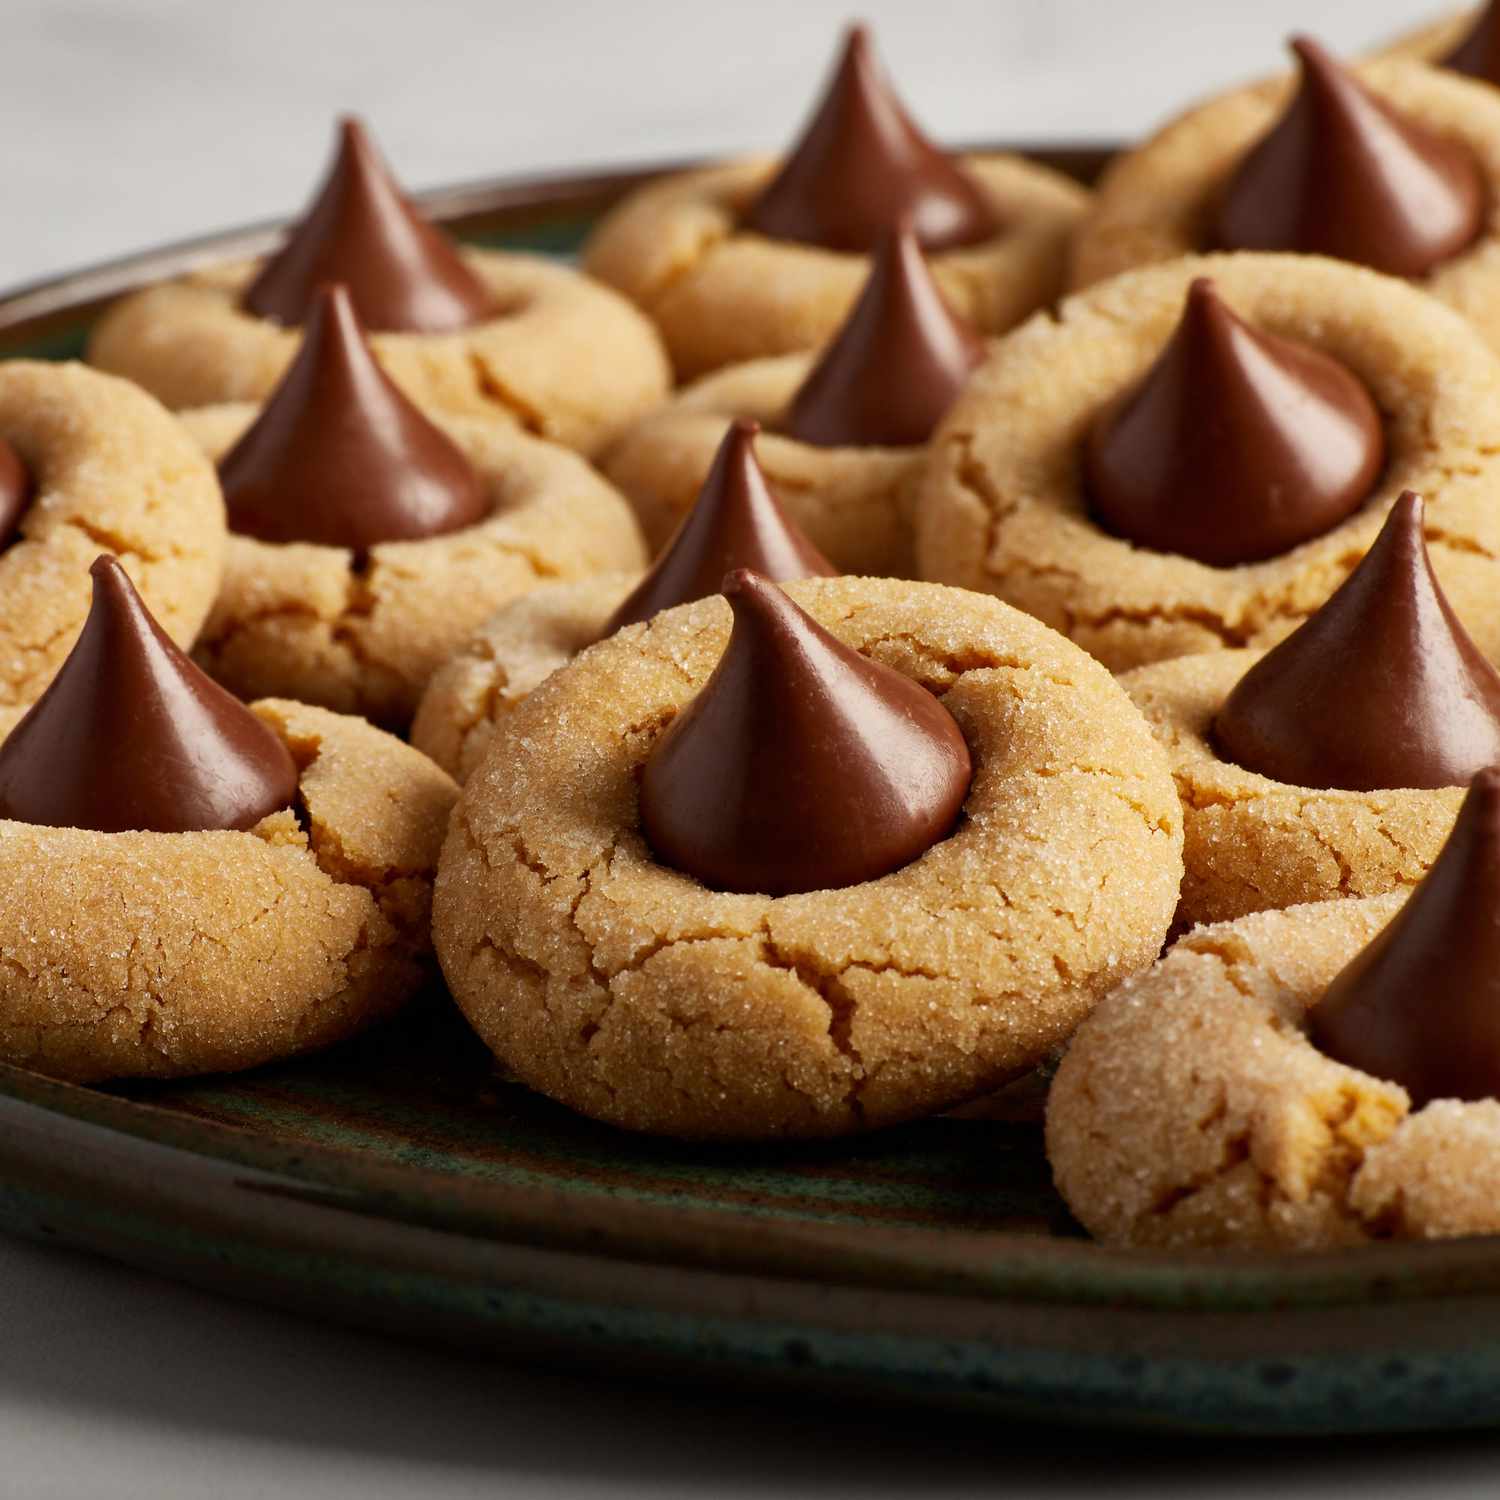 a low angle, close up view of a plate full of peanut butter cookies topped with a chocolate kiss